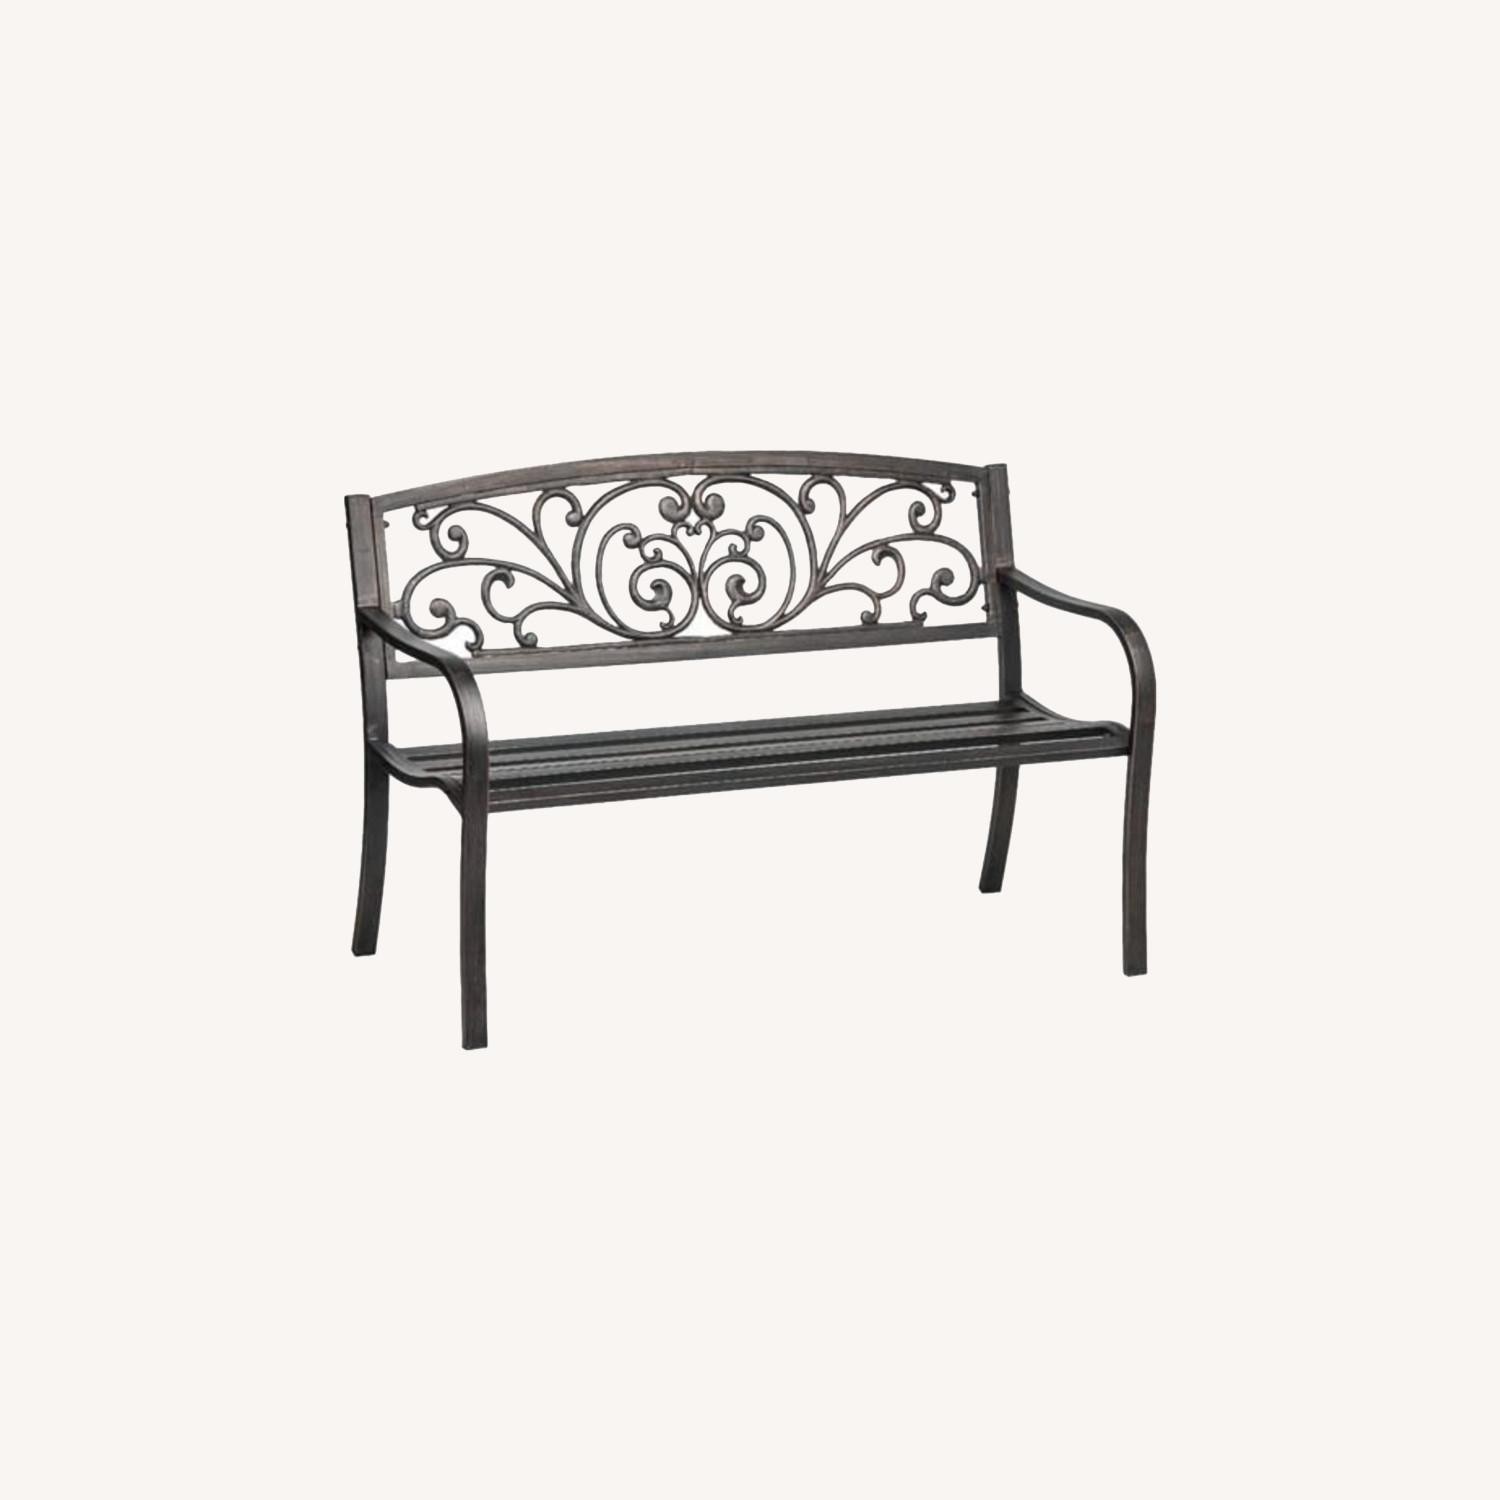 Cast Iron and Powder Coated Steel Ivy Bench